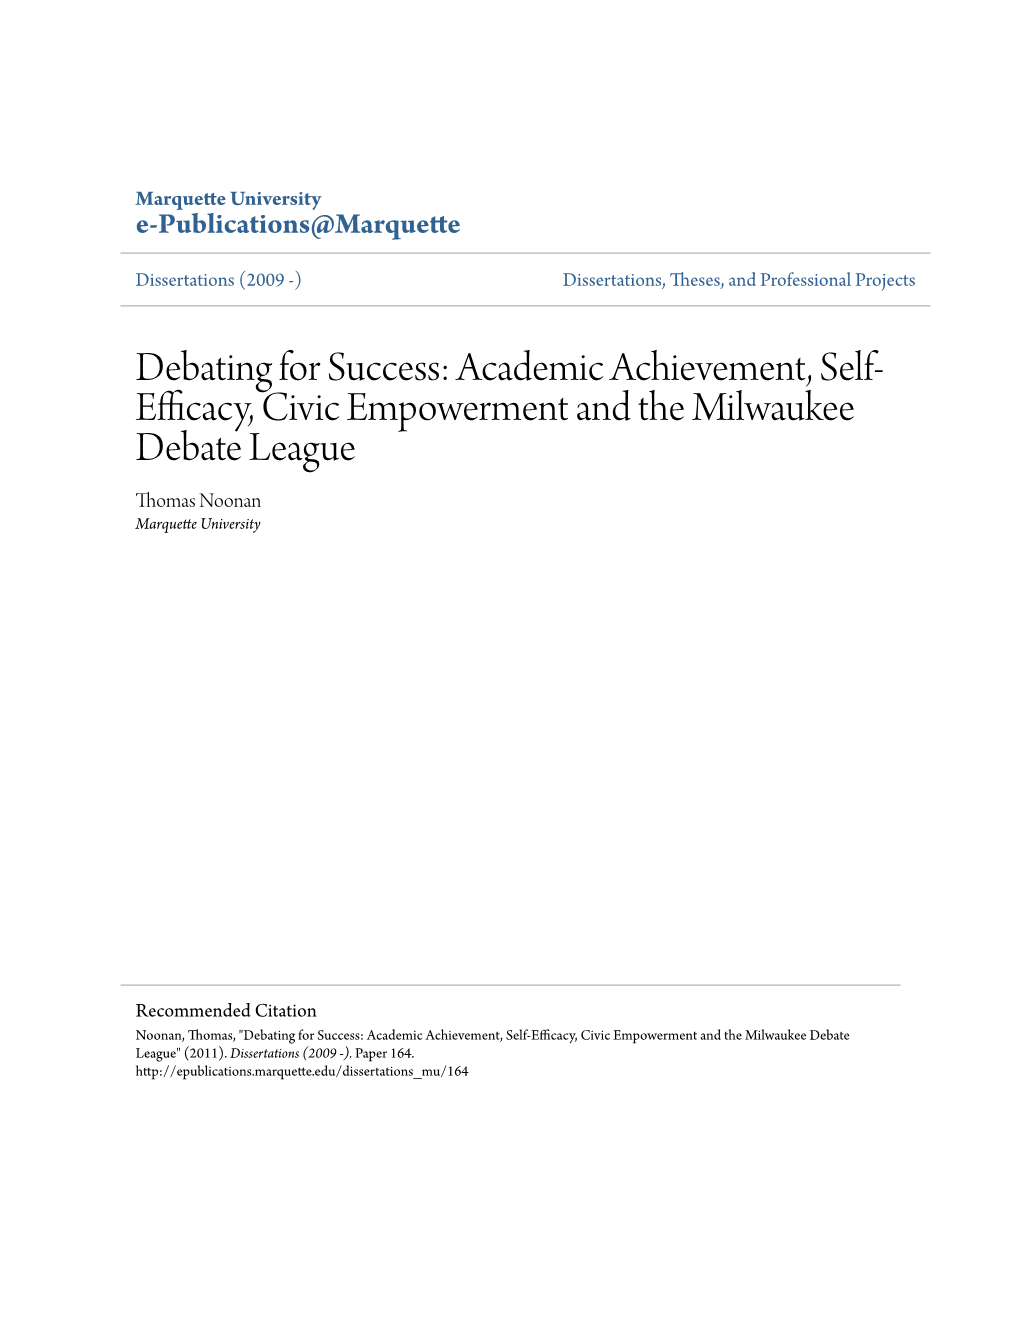 Debating for Success: Academic Achievement, Self-Efficacy, Civic Empowerment and the Milwaukee Debate League" (2011)